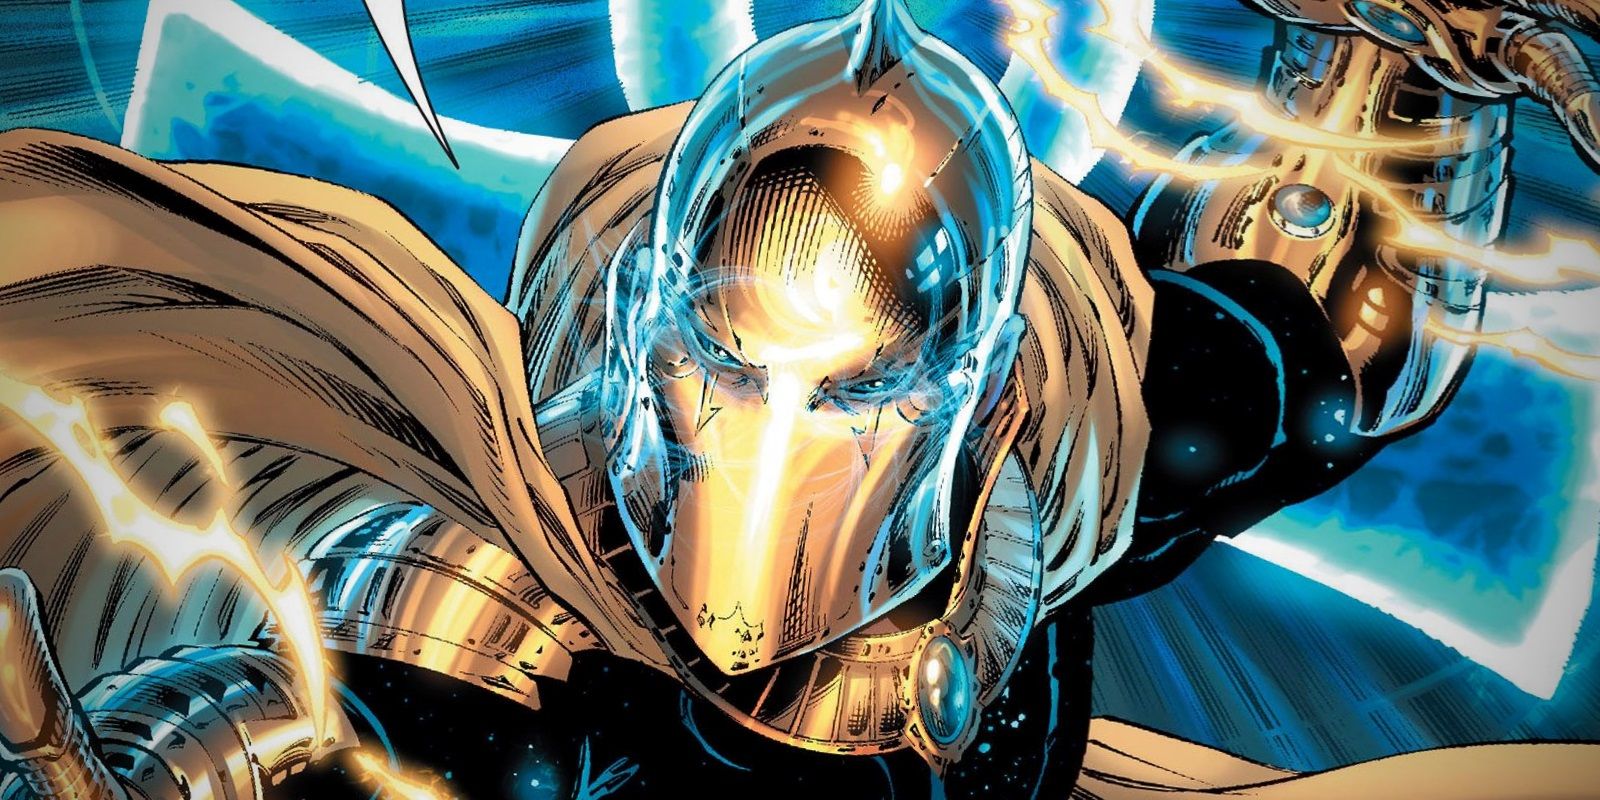 Doctor Fate uses his powers in DC Comics.